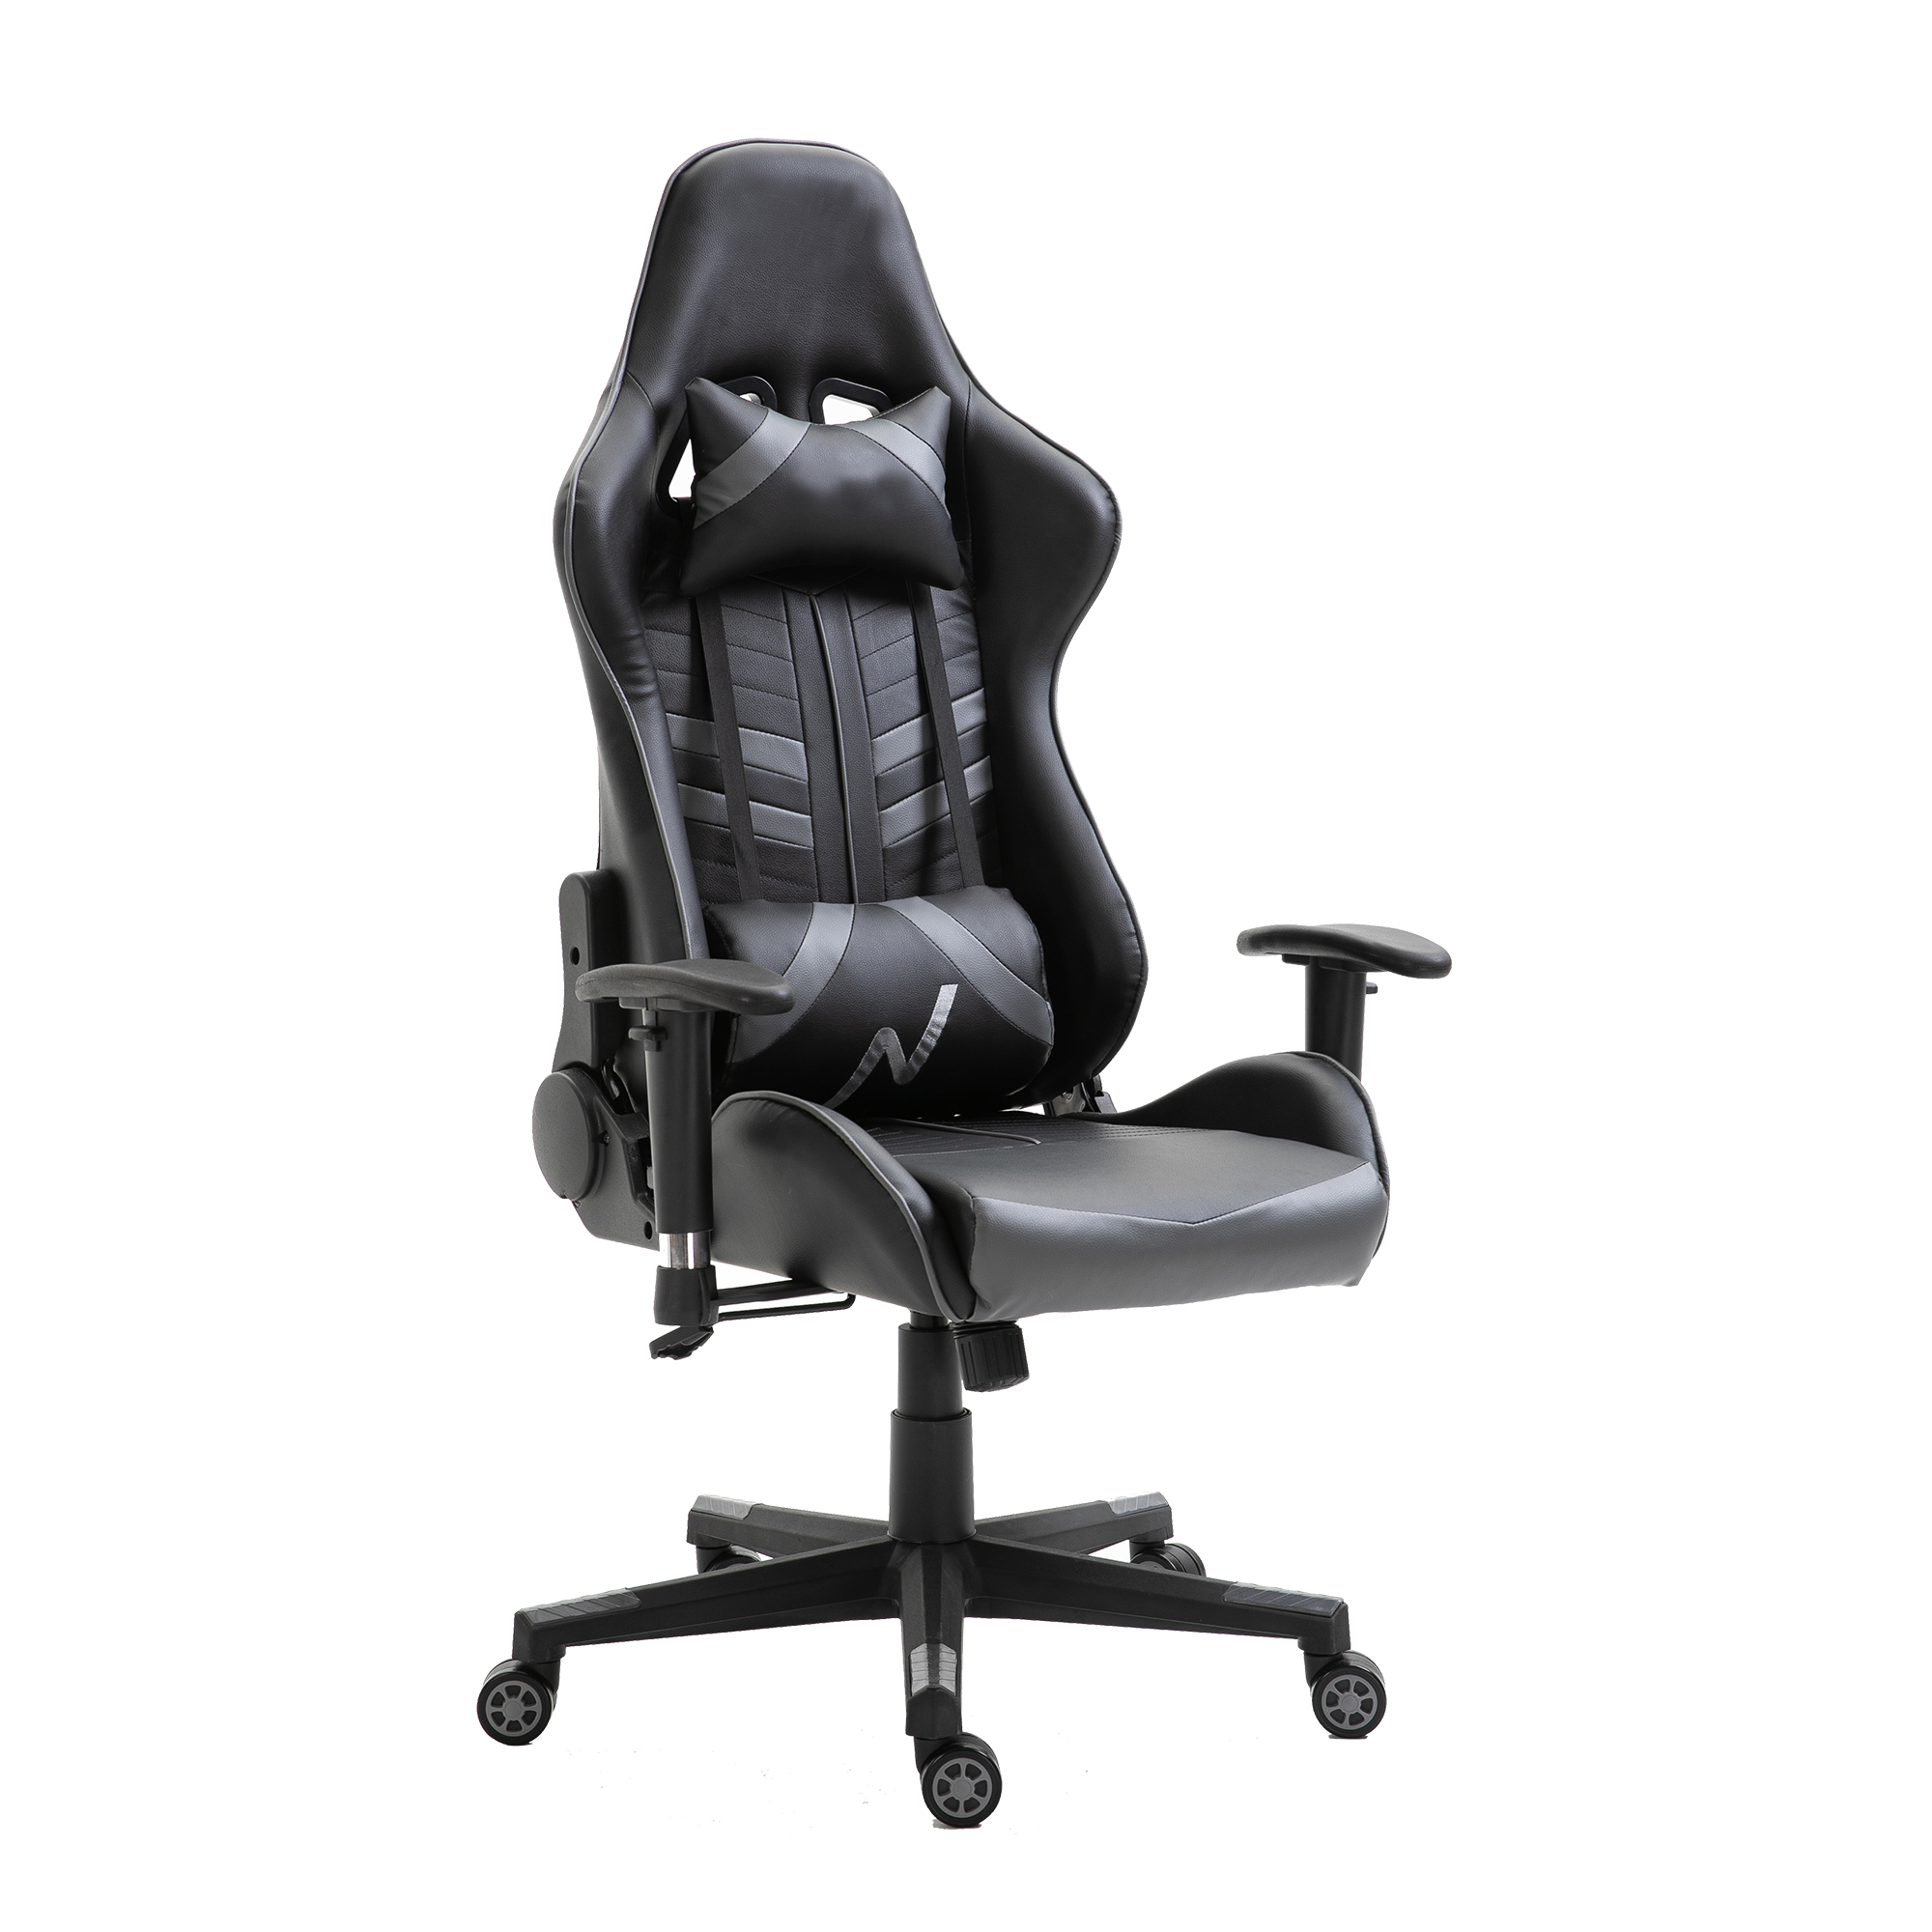 OEM High Quality Expensive Gaming Chair Supplier –  Pu Leather Gaming Race Chair Swivel Comfortable Ergonomic Racing Gaming Chair – ANJI JIFANG